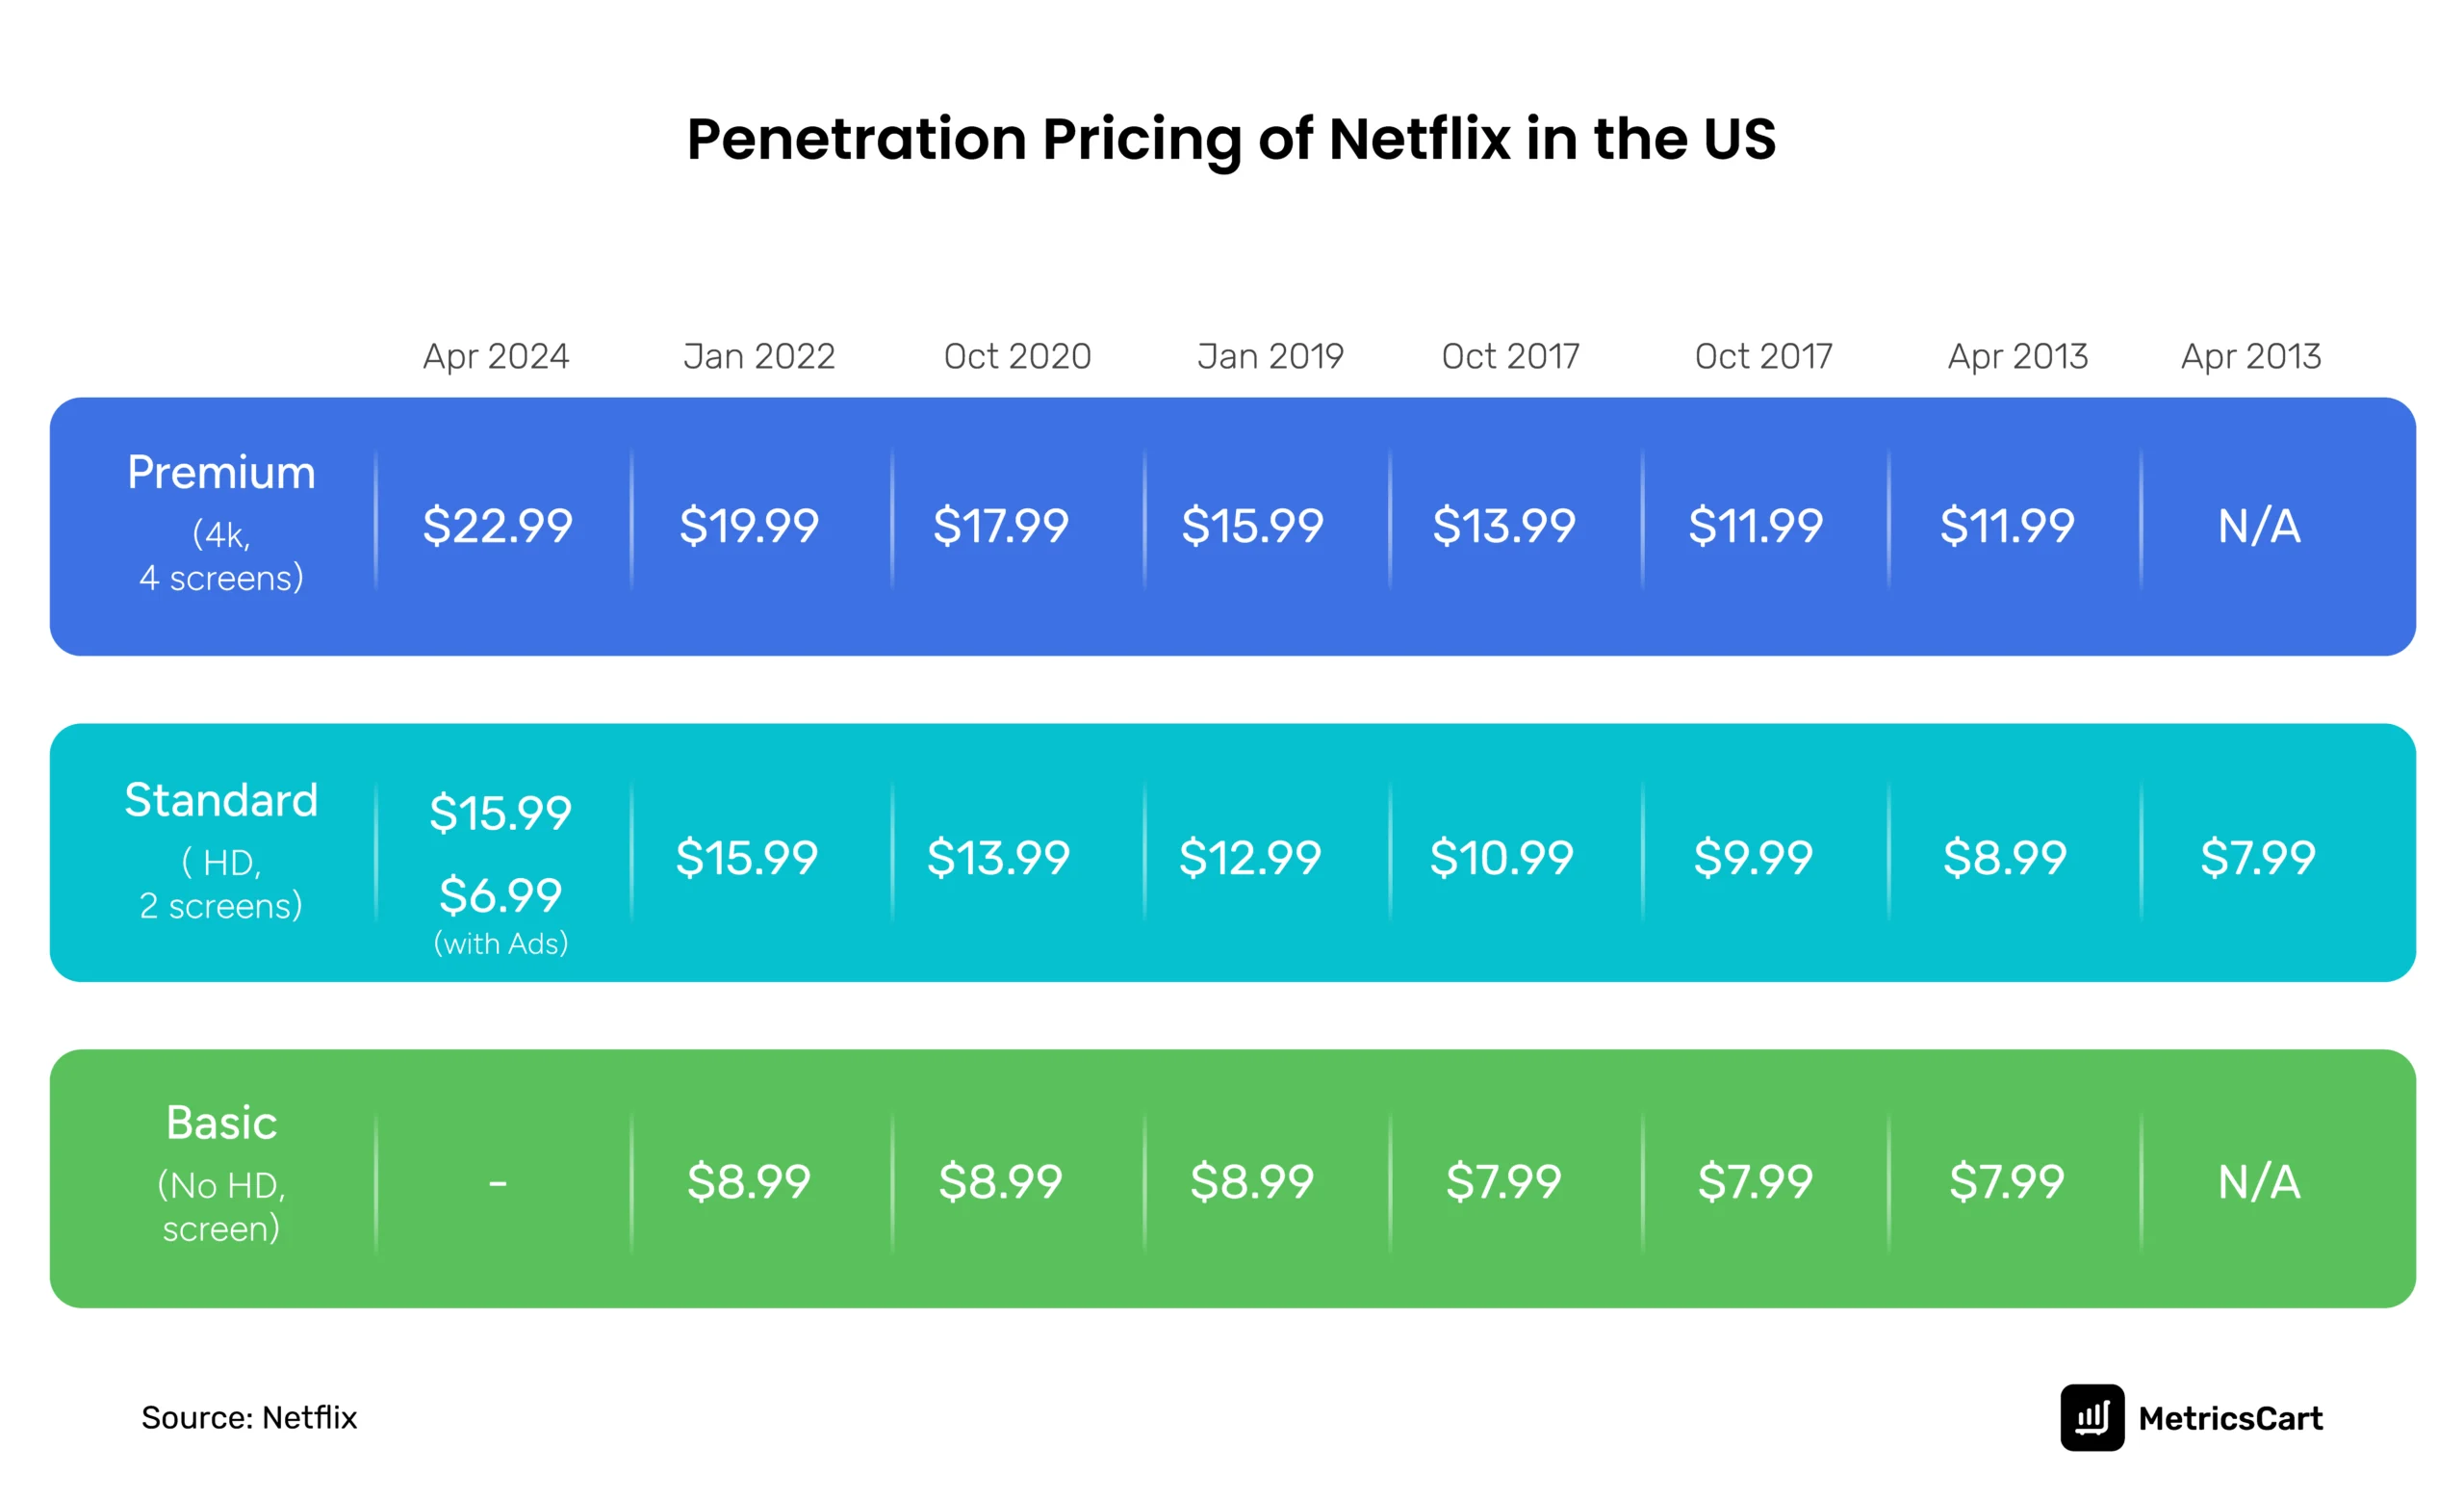 the penetration pricing strategy of Netflix